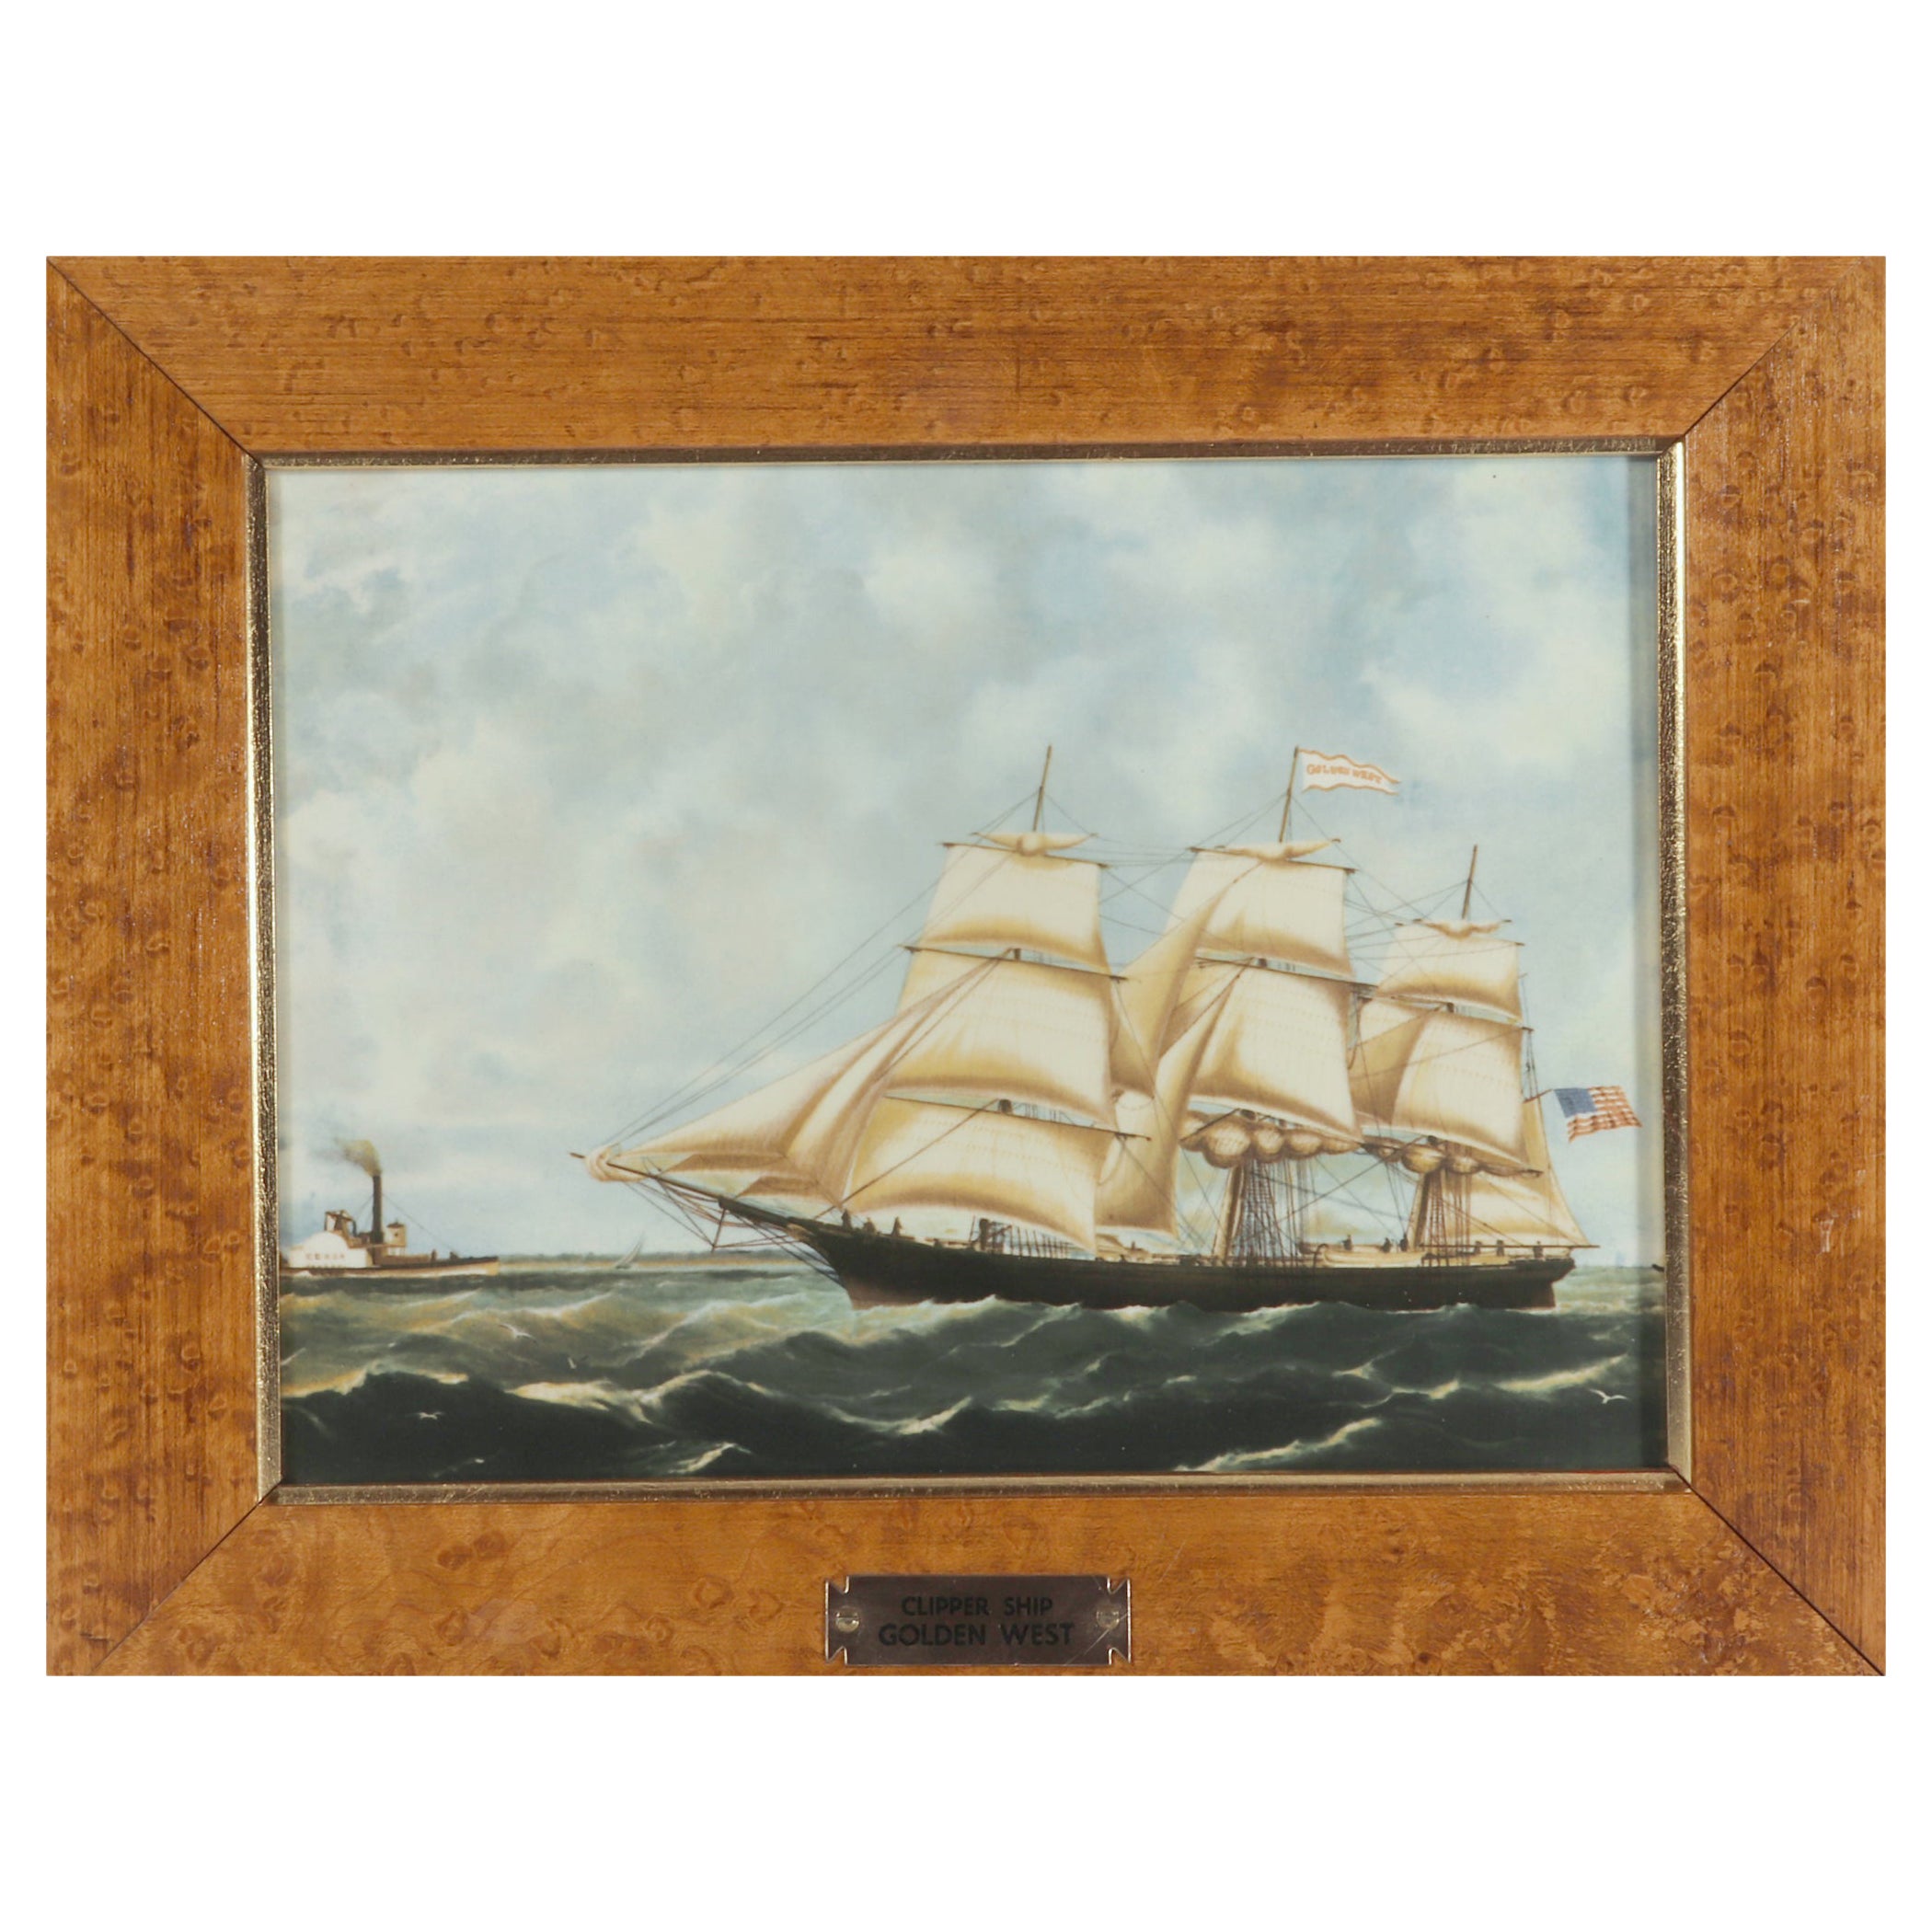 Wedgwood Porcelain Plaque of The Clipper Ship, Golden West For Sale